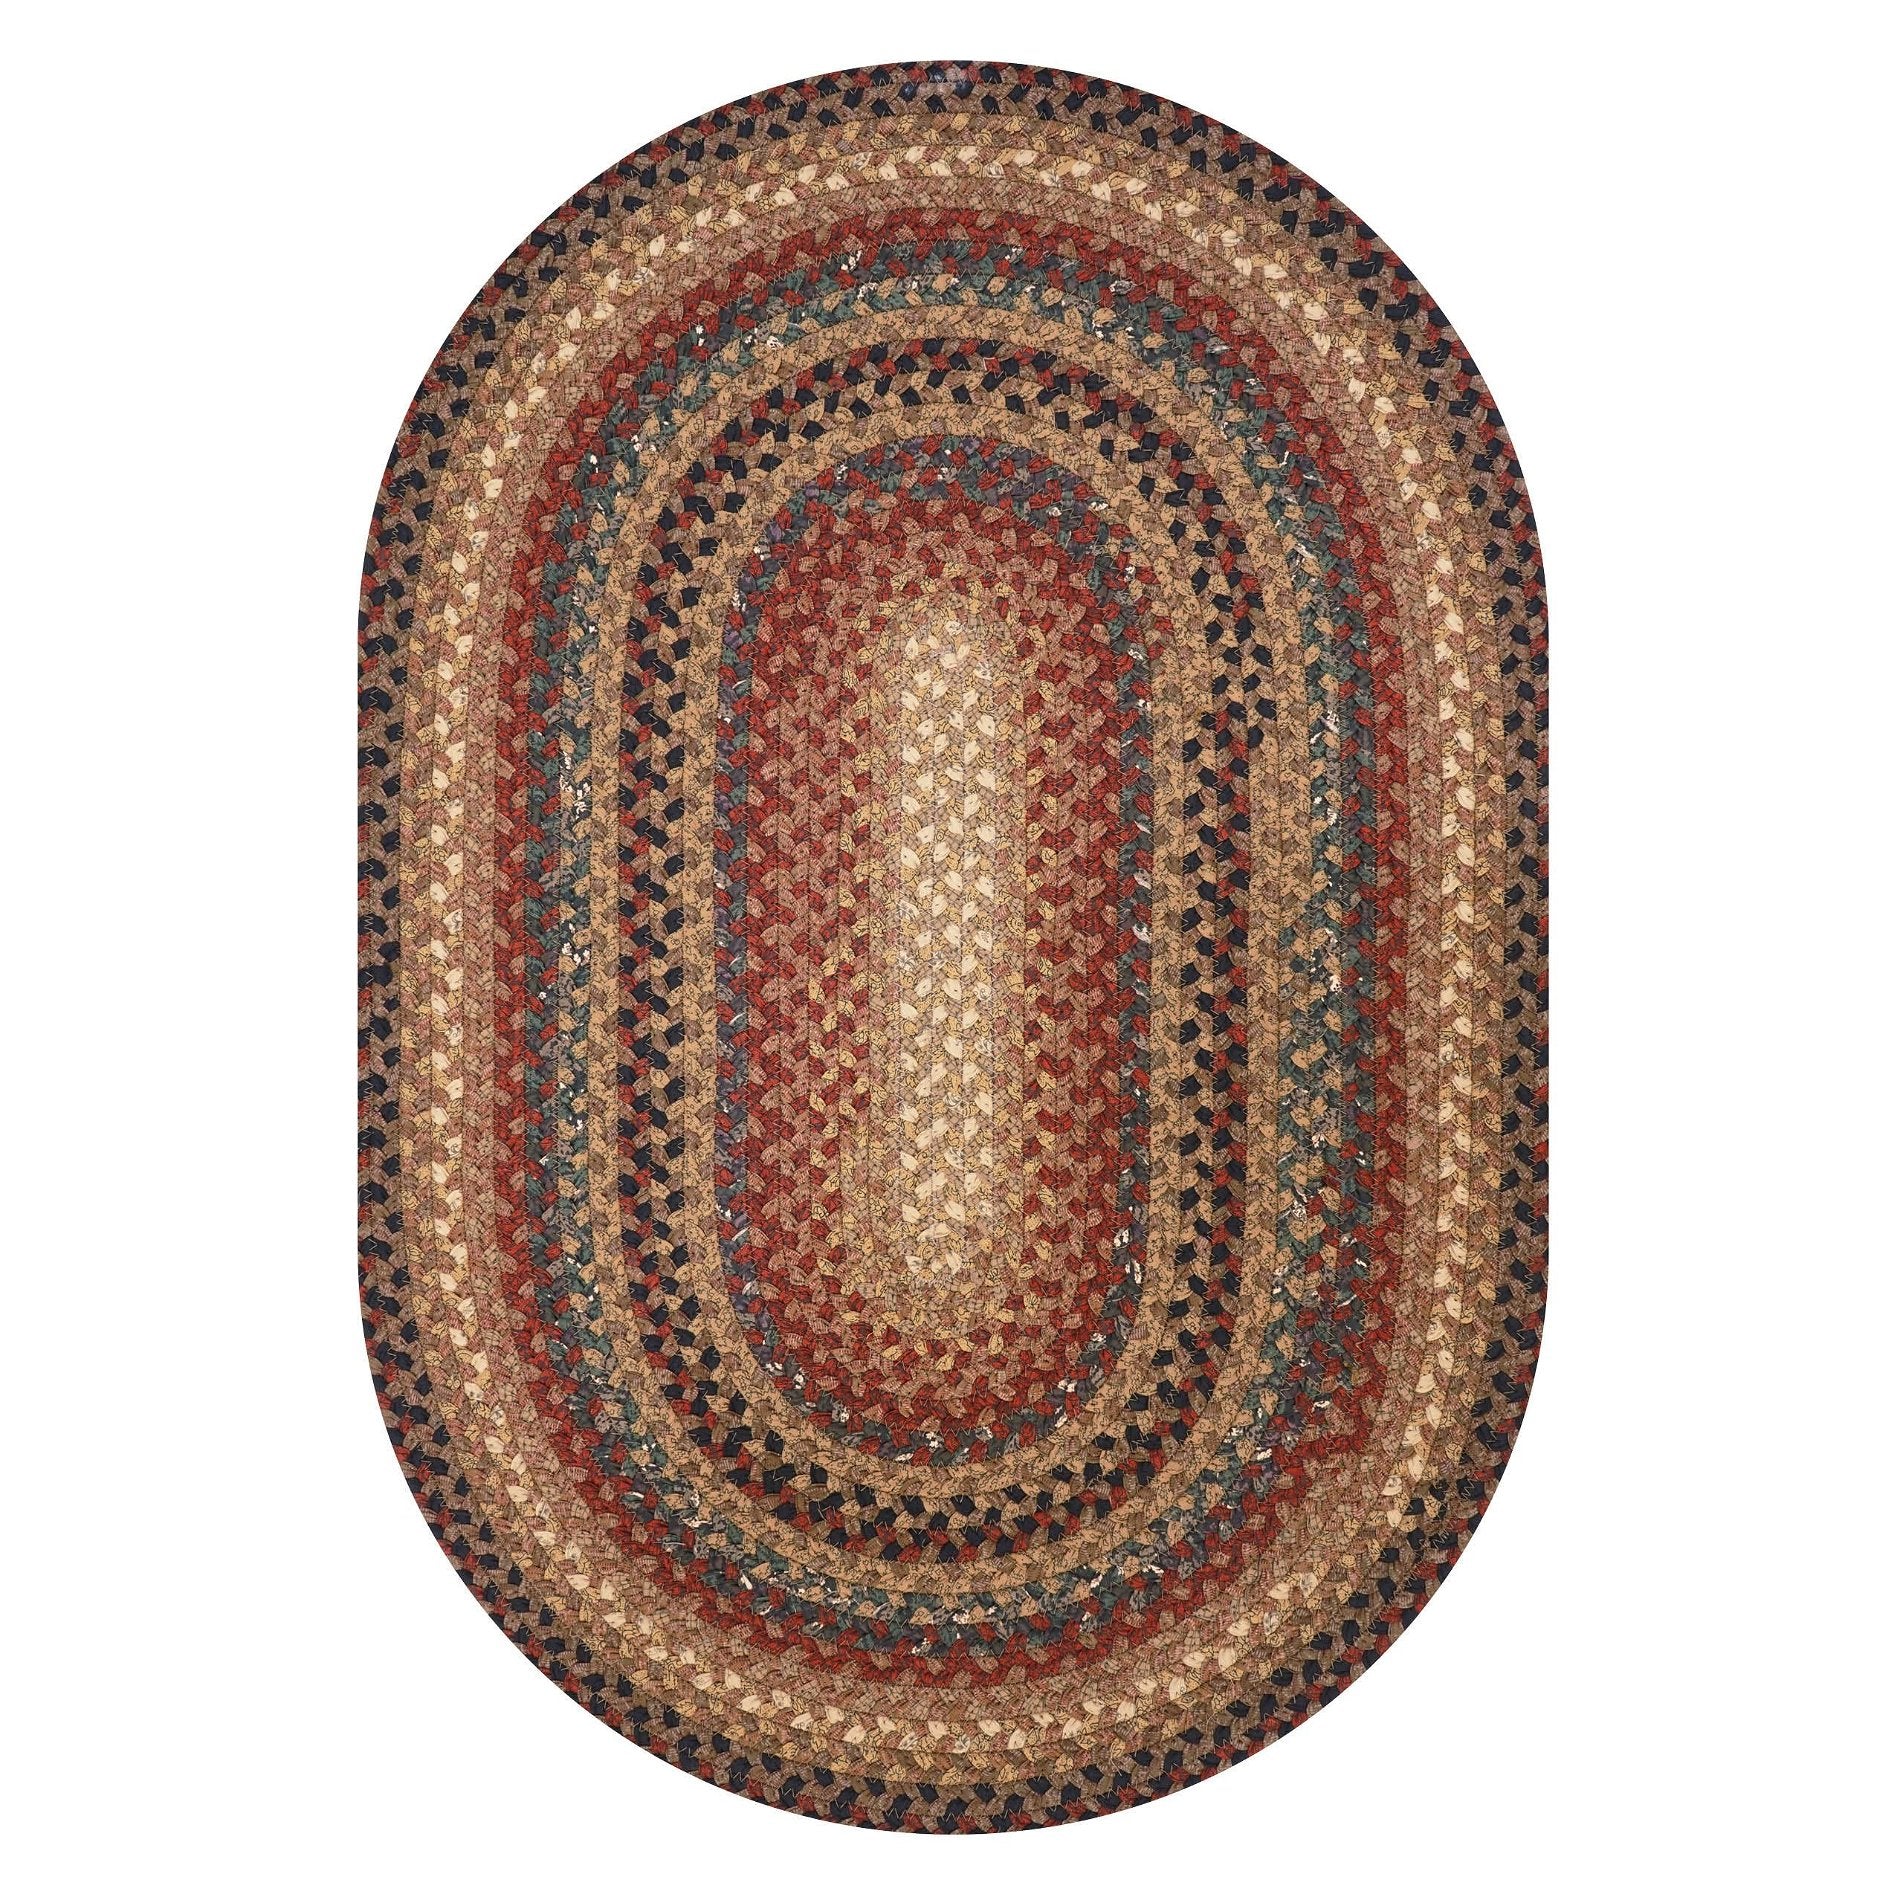 Peppercorn Multi Color Cotton Braided Oval Rugs - Braided-Rugs.com